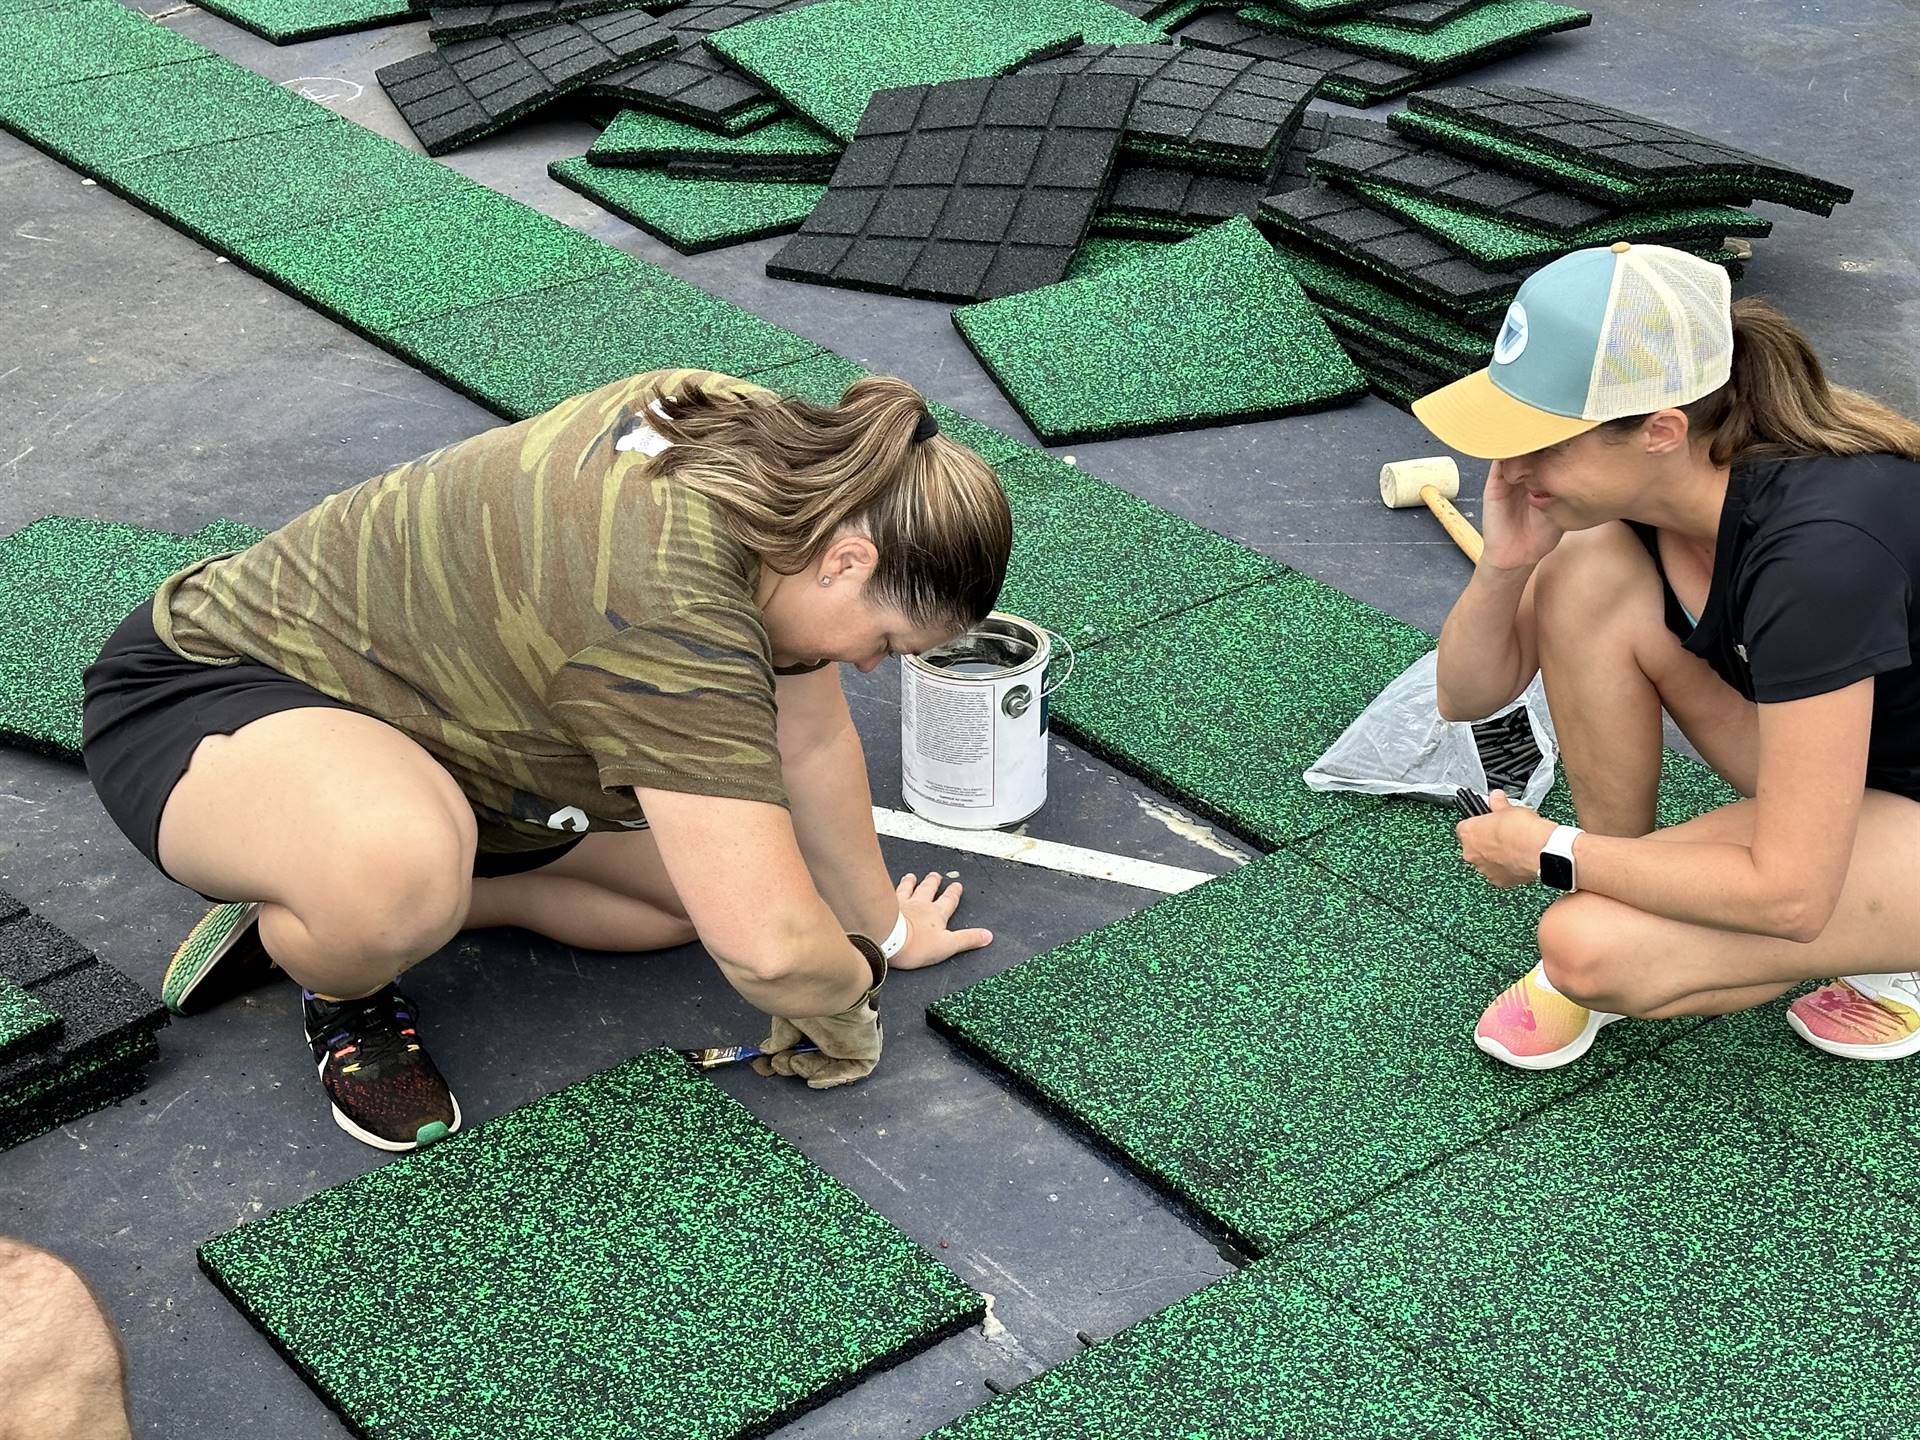 Staff working on the playground tiles